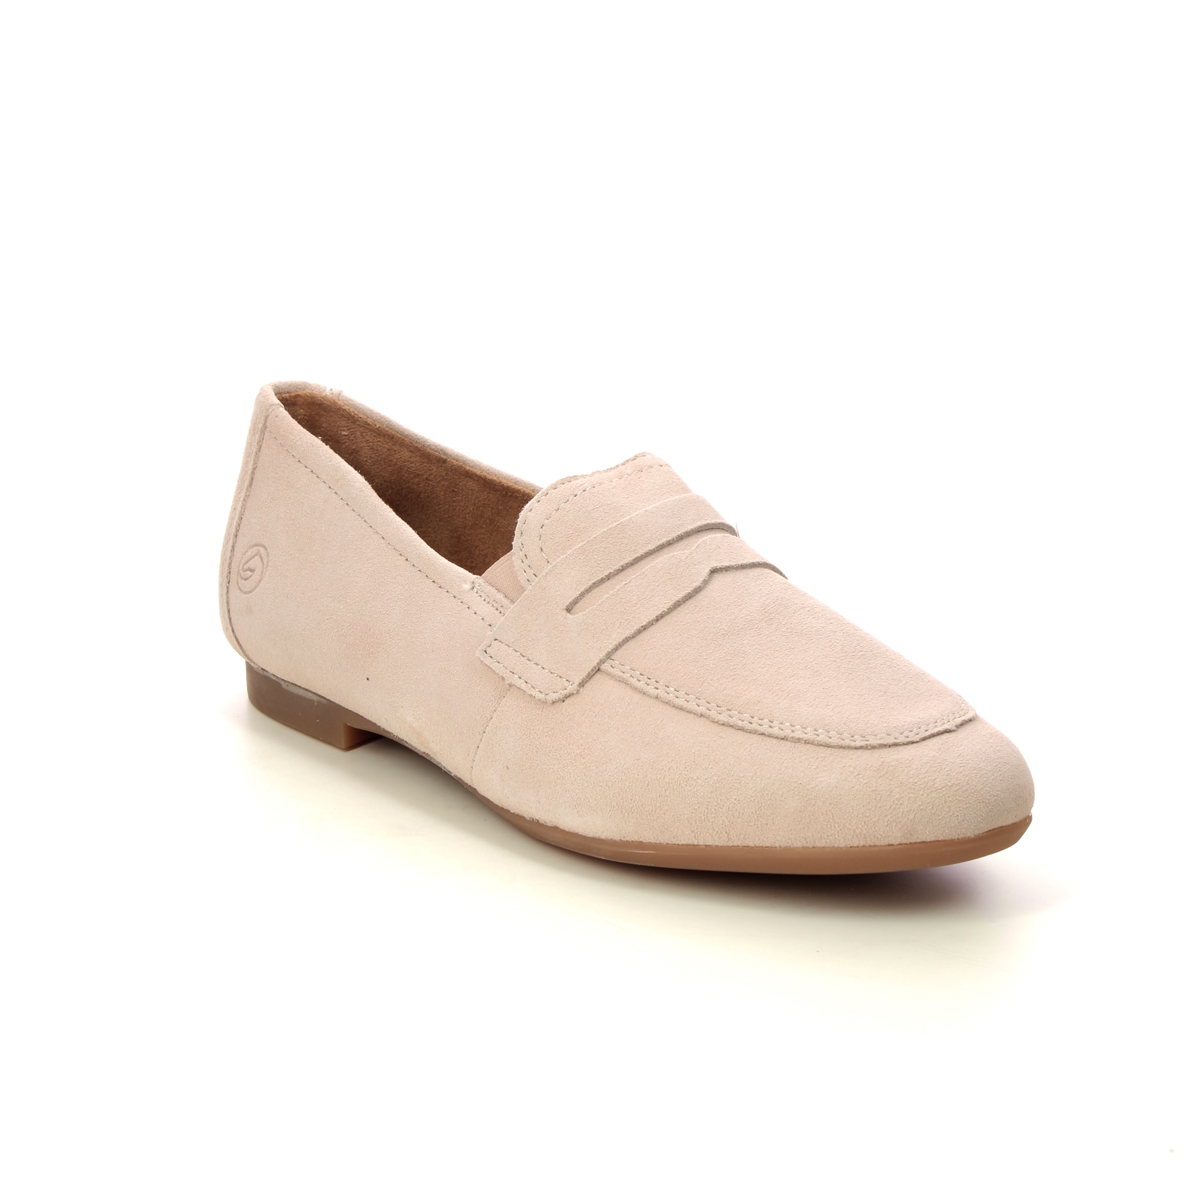 Remonte D0K02-61 Viva Penny Light Taupe suede Womens loafers in a Plain Leather in Size 41